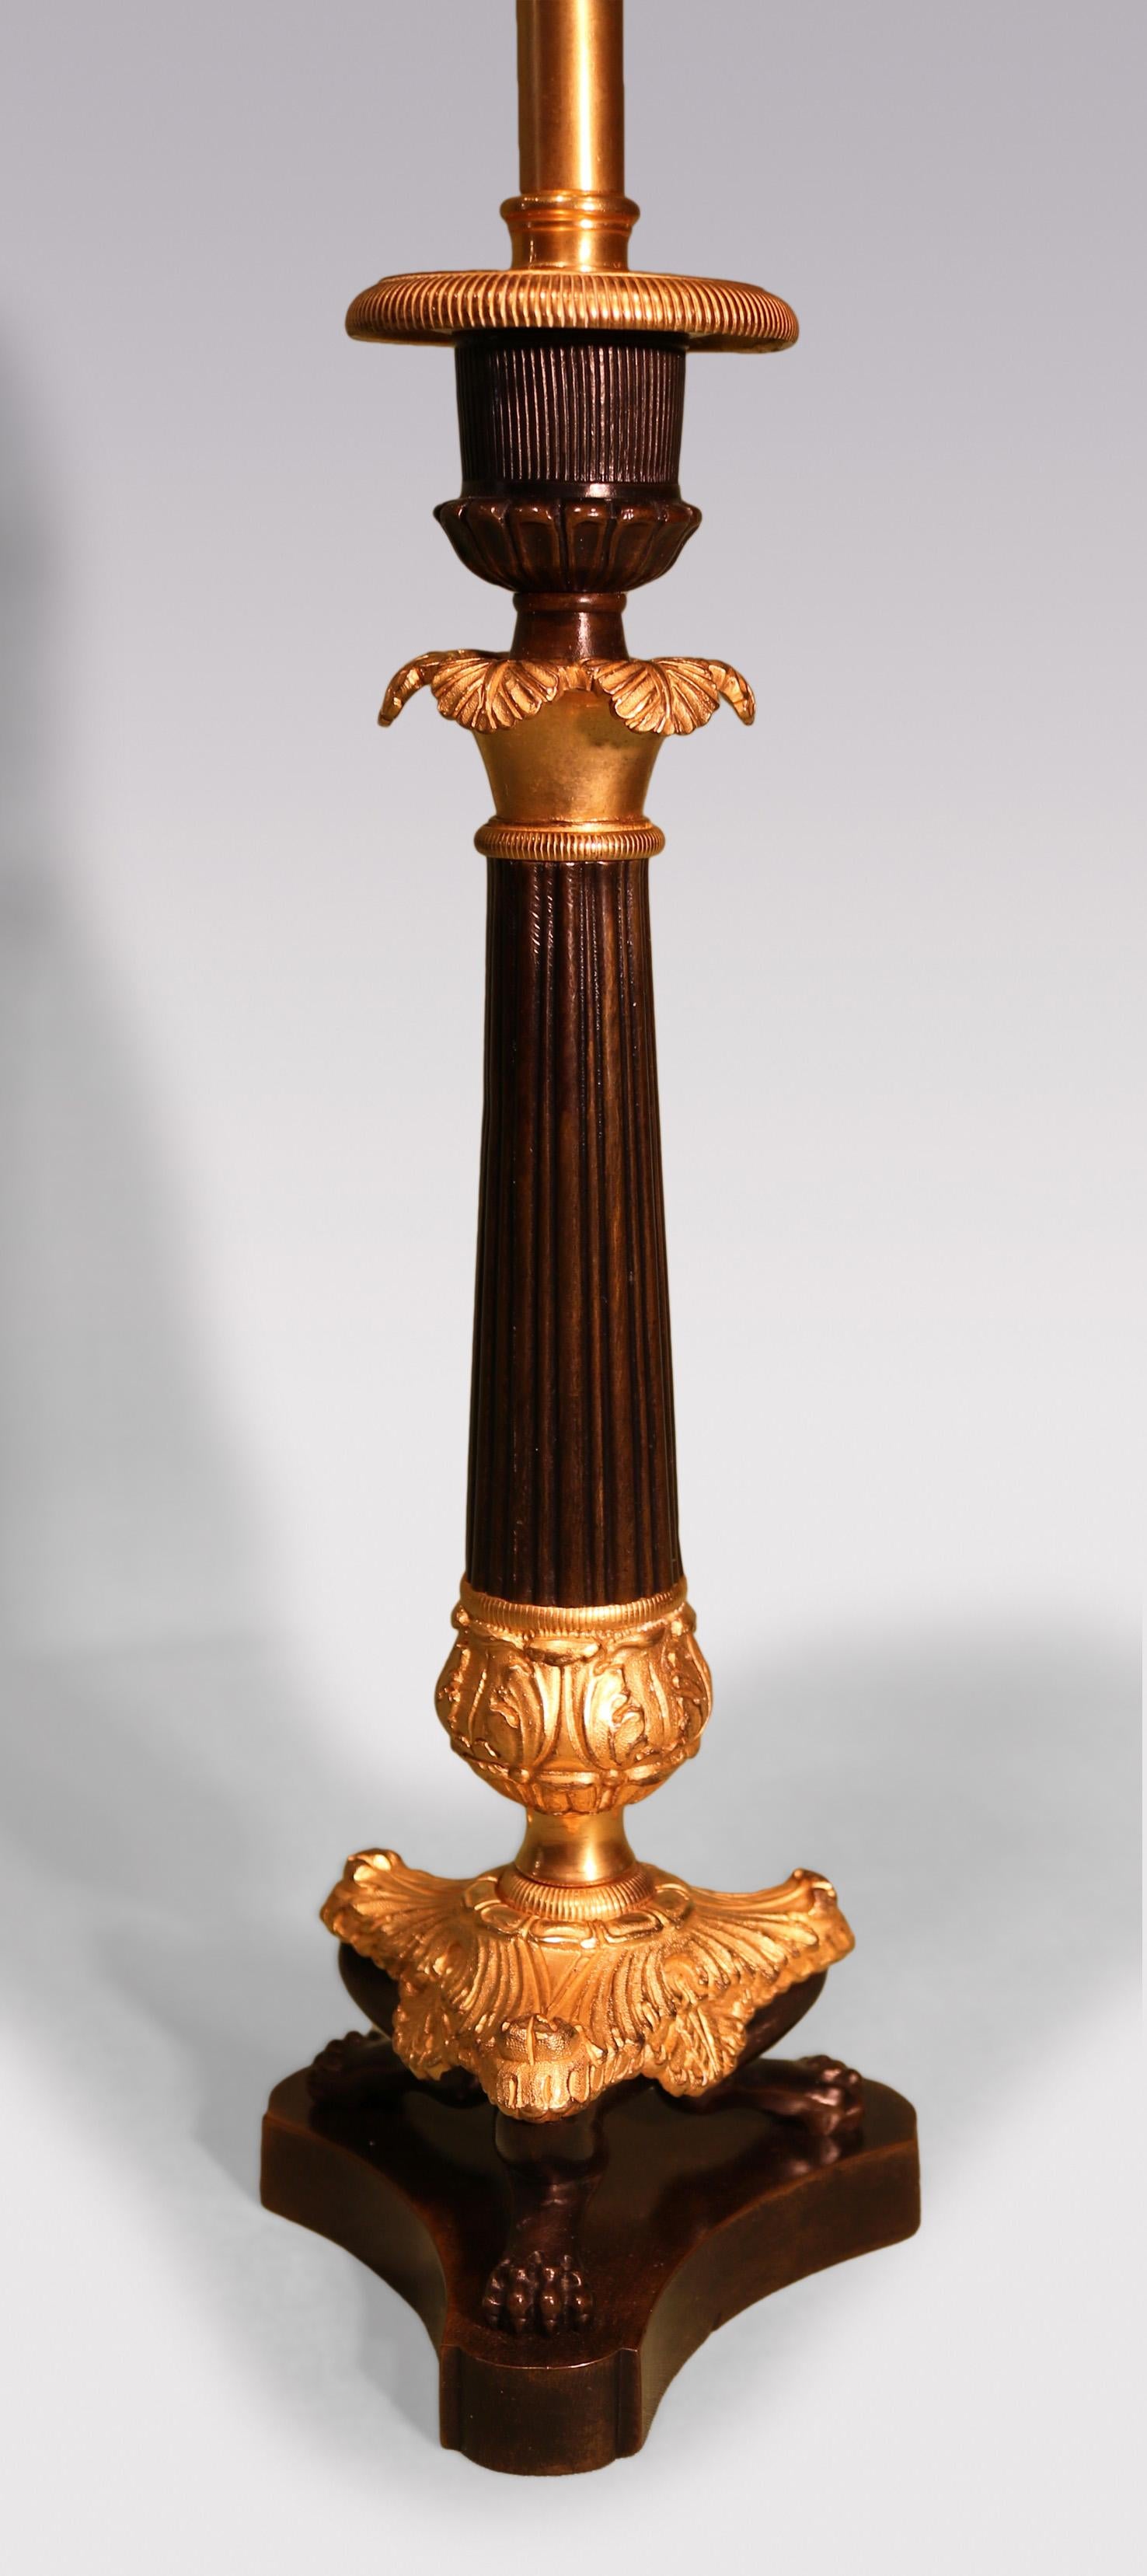 A Pair of Mid-19th Century bronze & ormolu Candlesticks having reeded sconces above leaf scrolled reeded tapering stems with leaf scroll & lion’s paw triform bases.